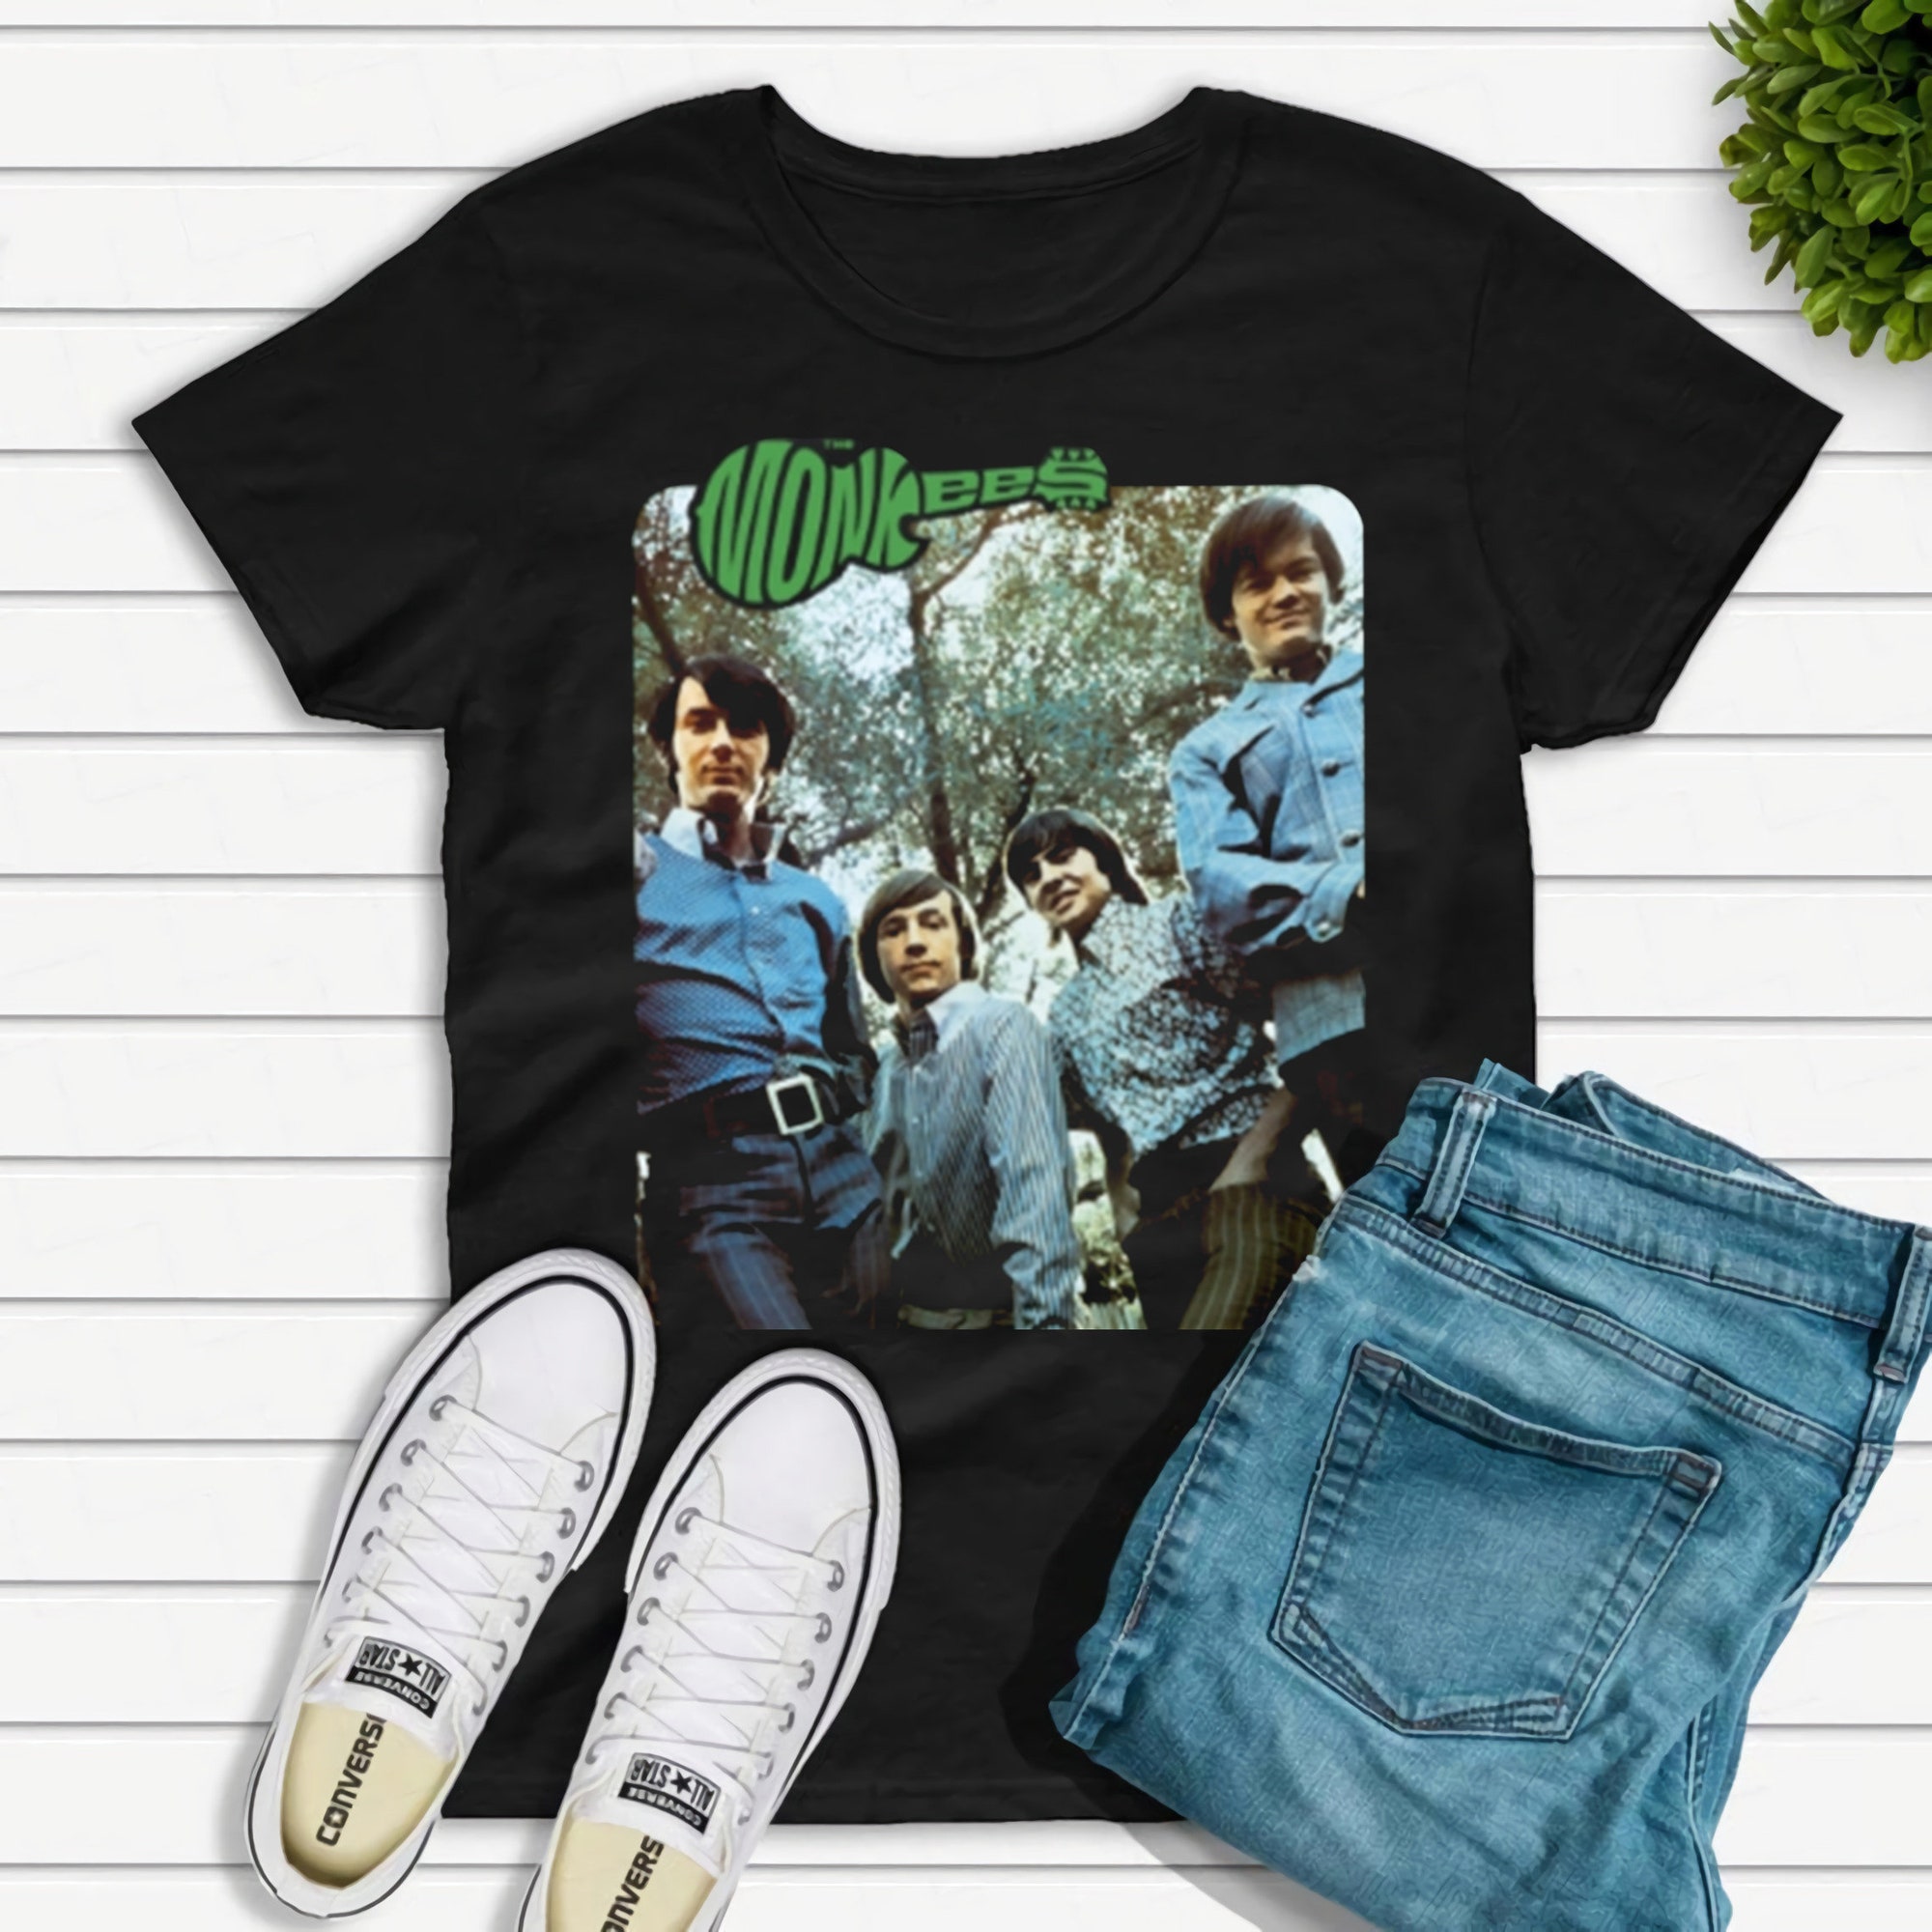 More Of The Monkees T-Shirt, The Monkees Shirt Gift For Fan, The Monkees Band Shirt